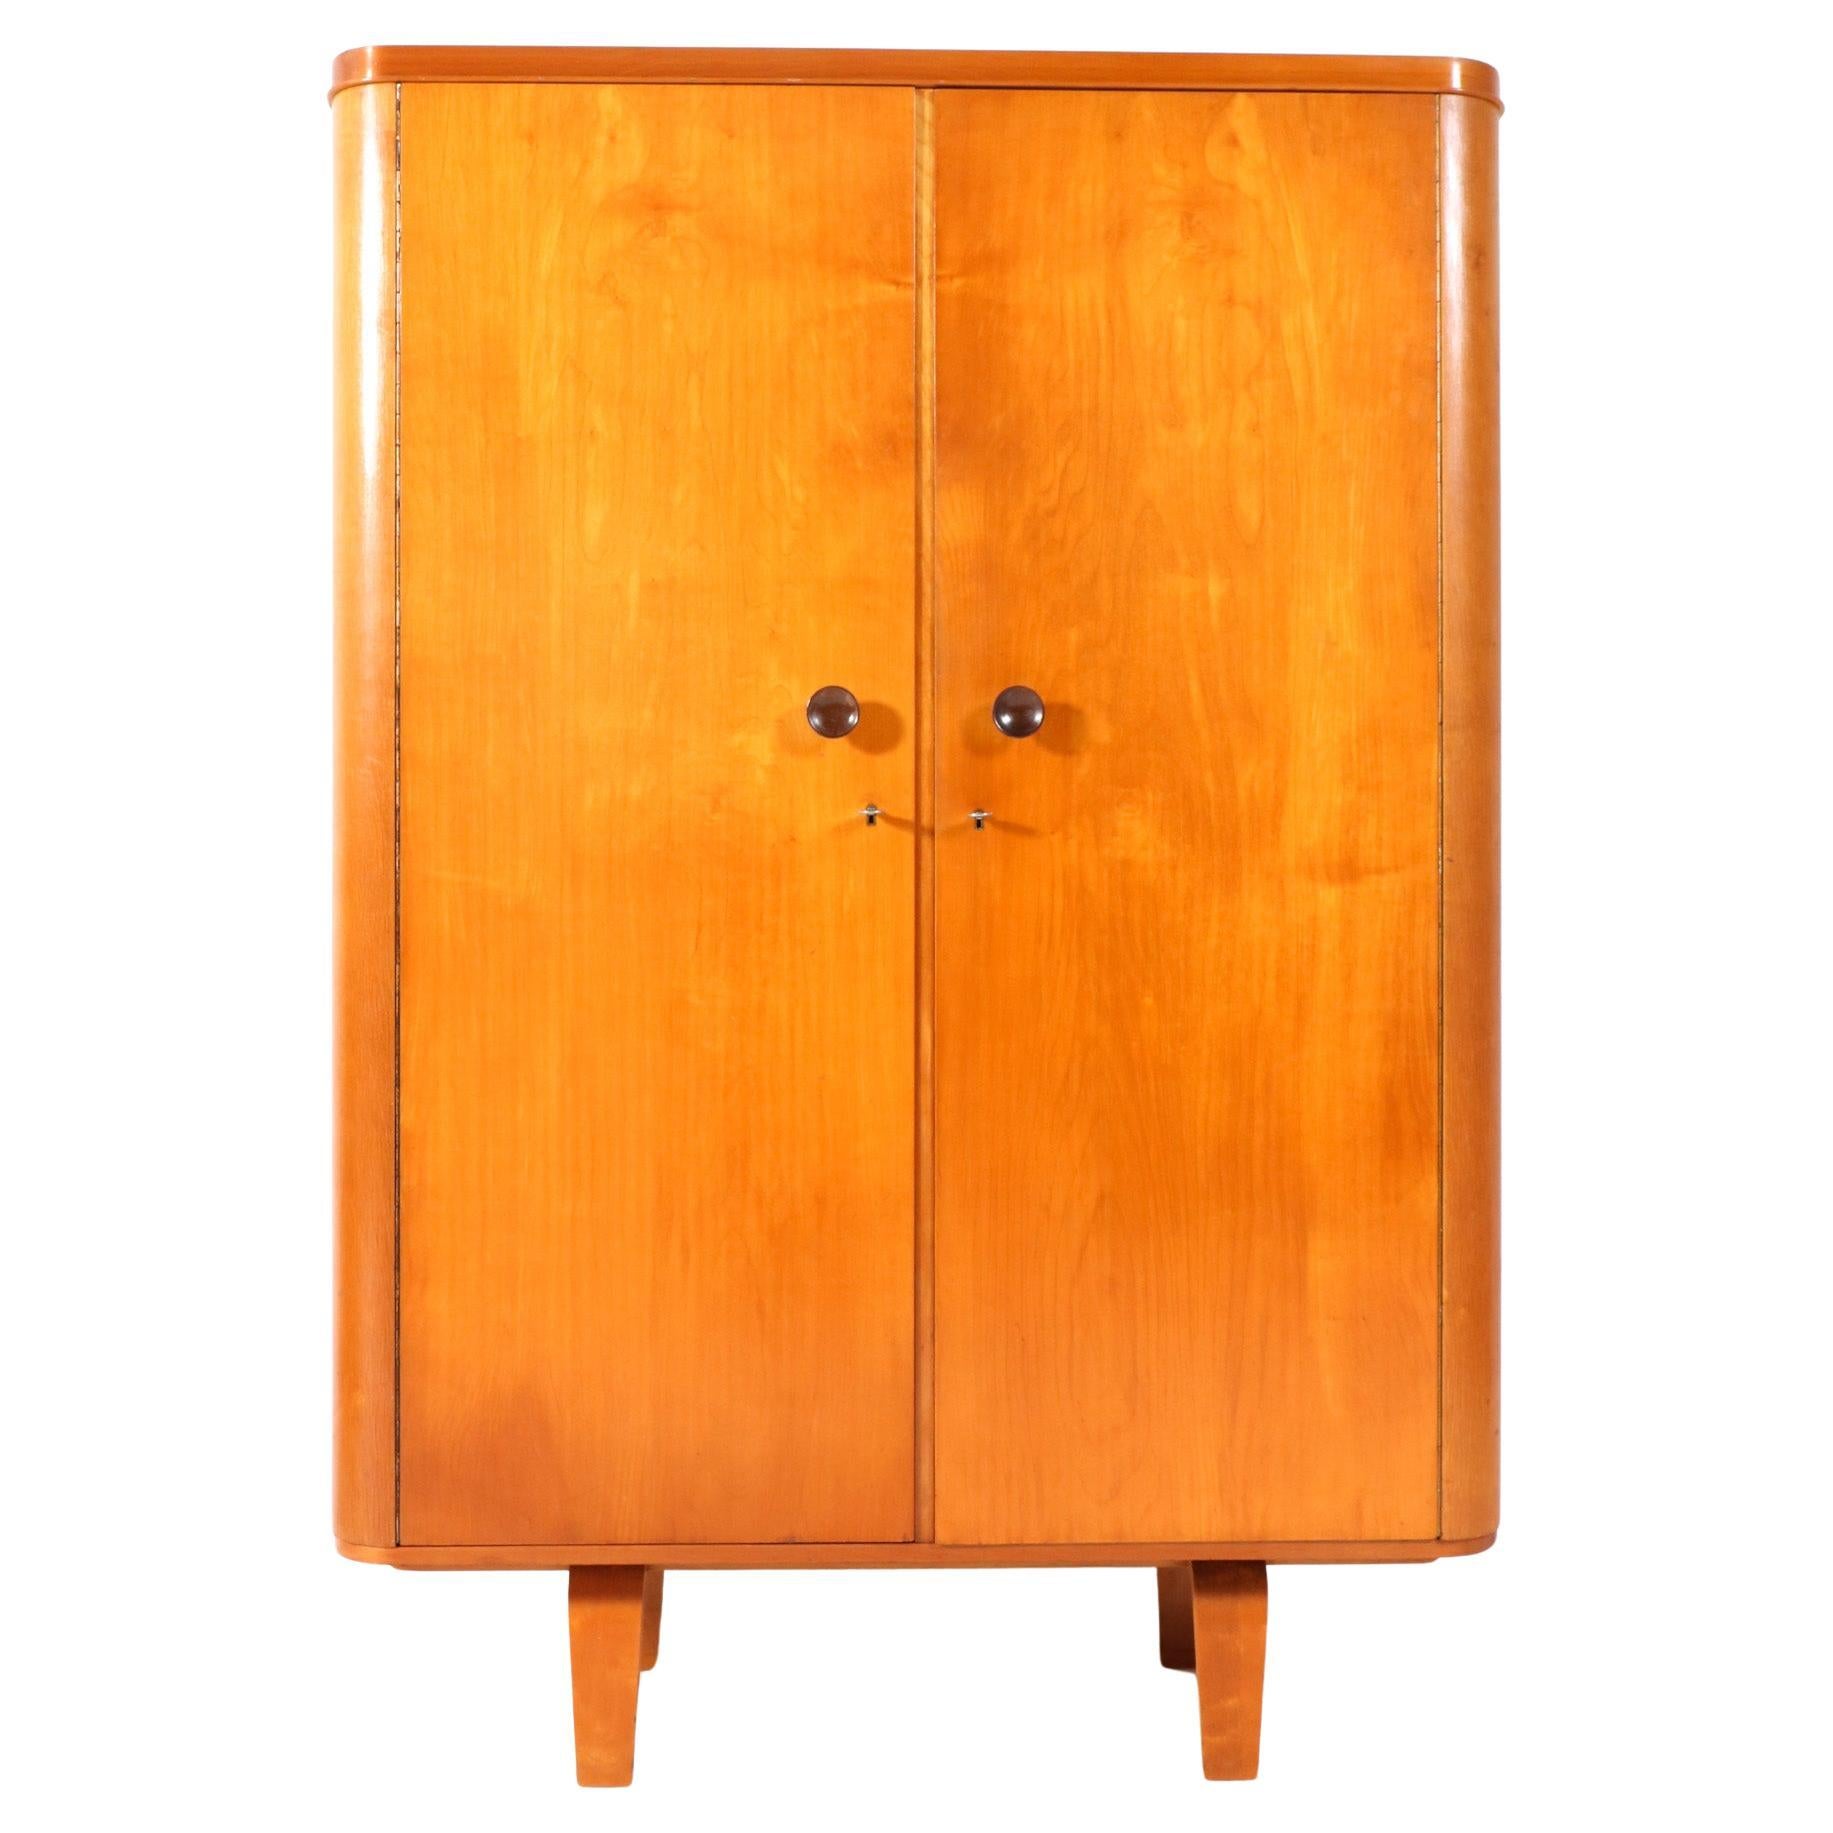  Mid-Century Modern Armoire by Cor Alons for Den Boer Gouda, 1949 For Sale